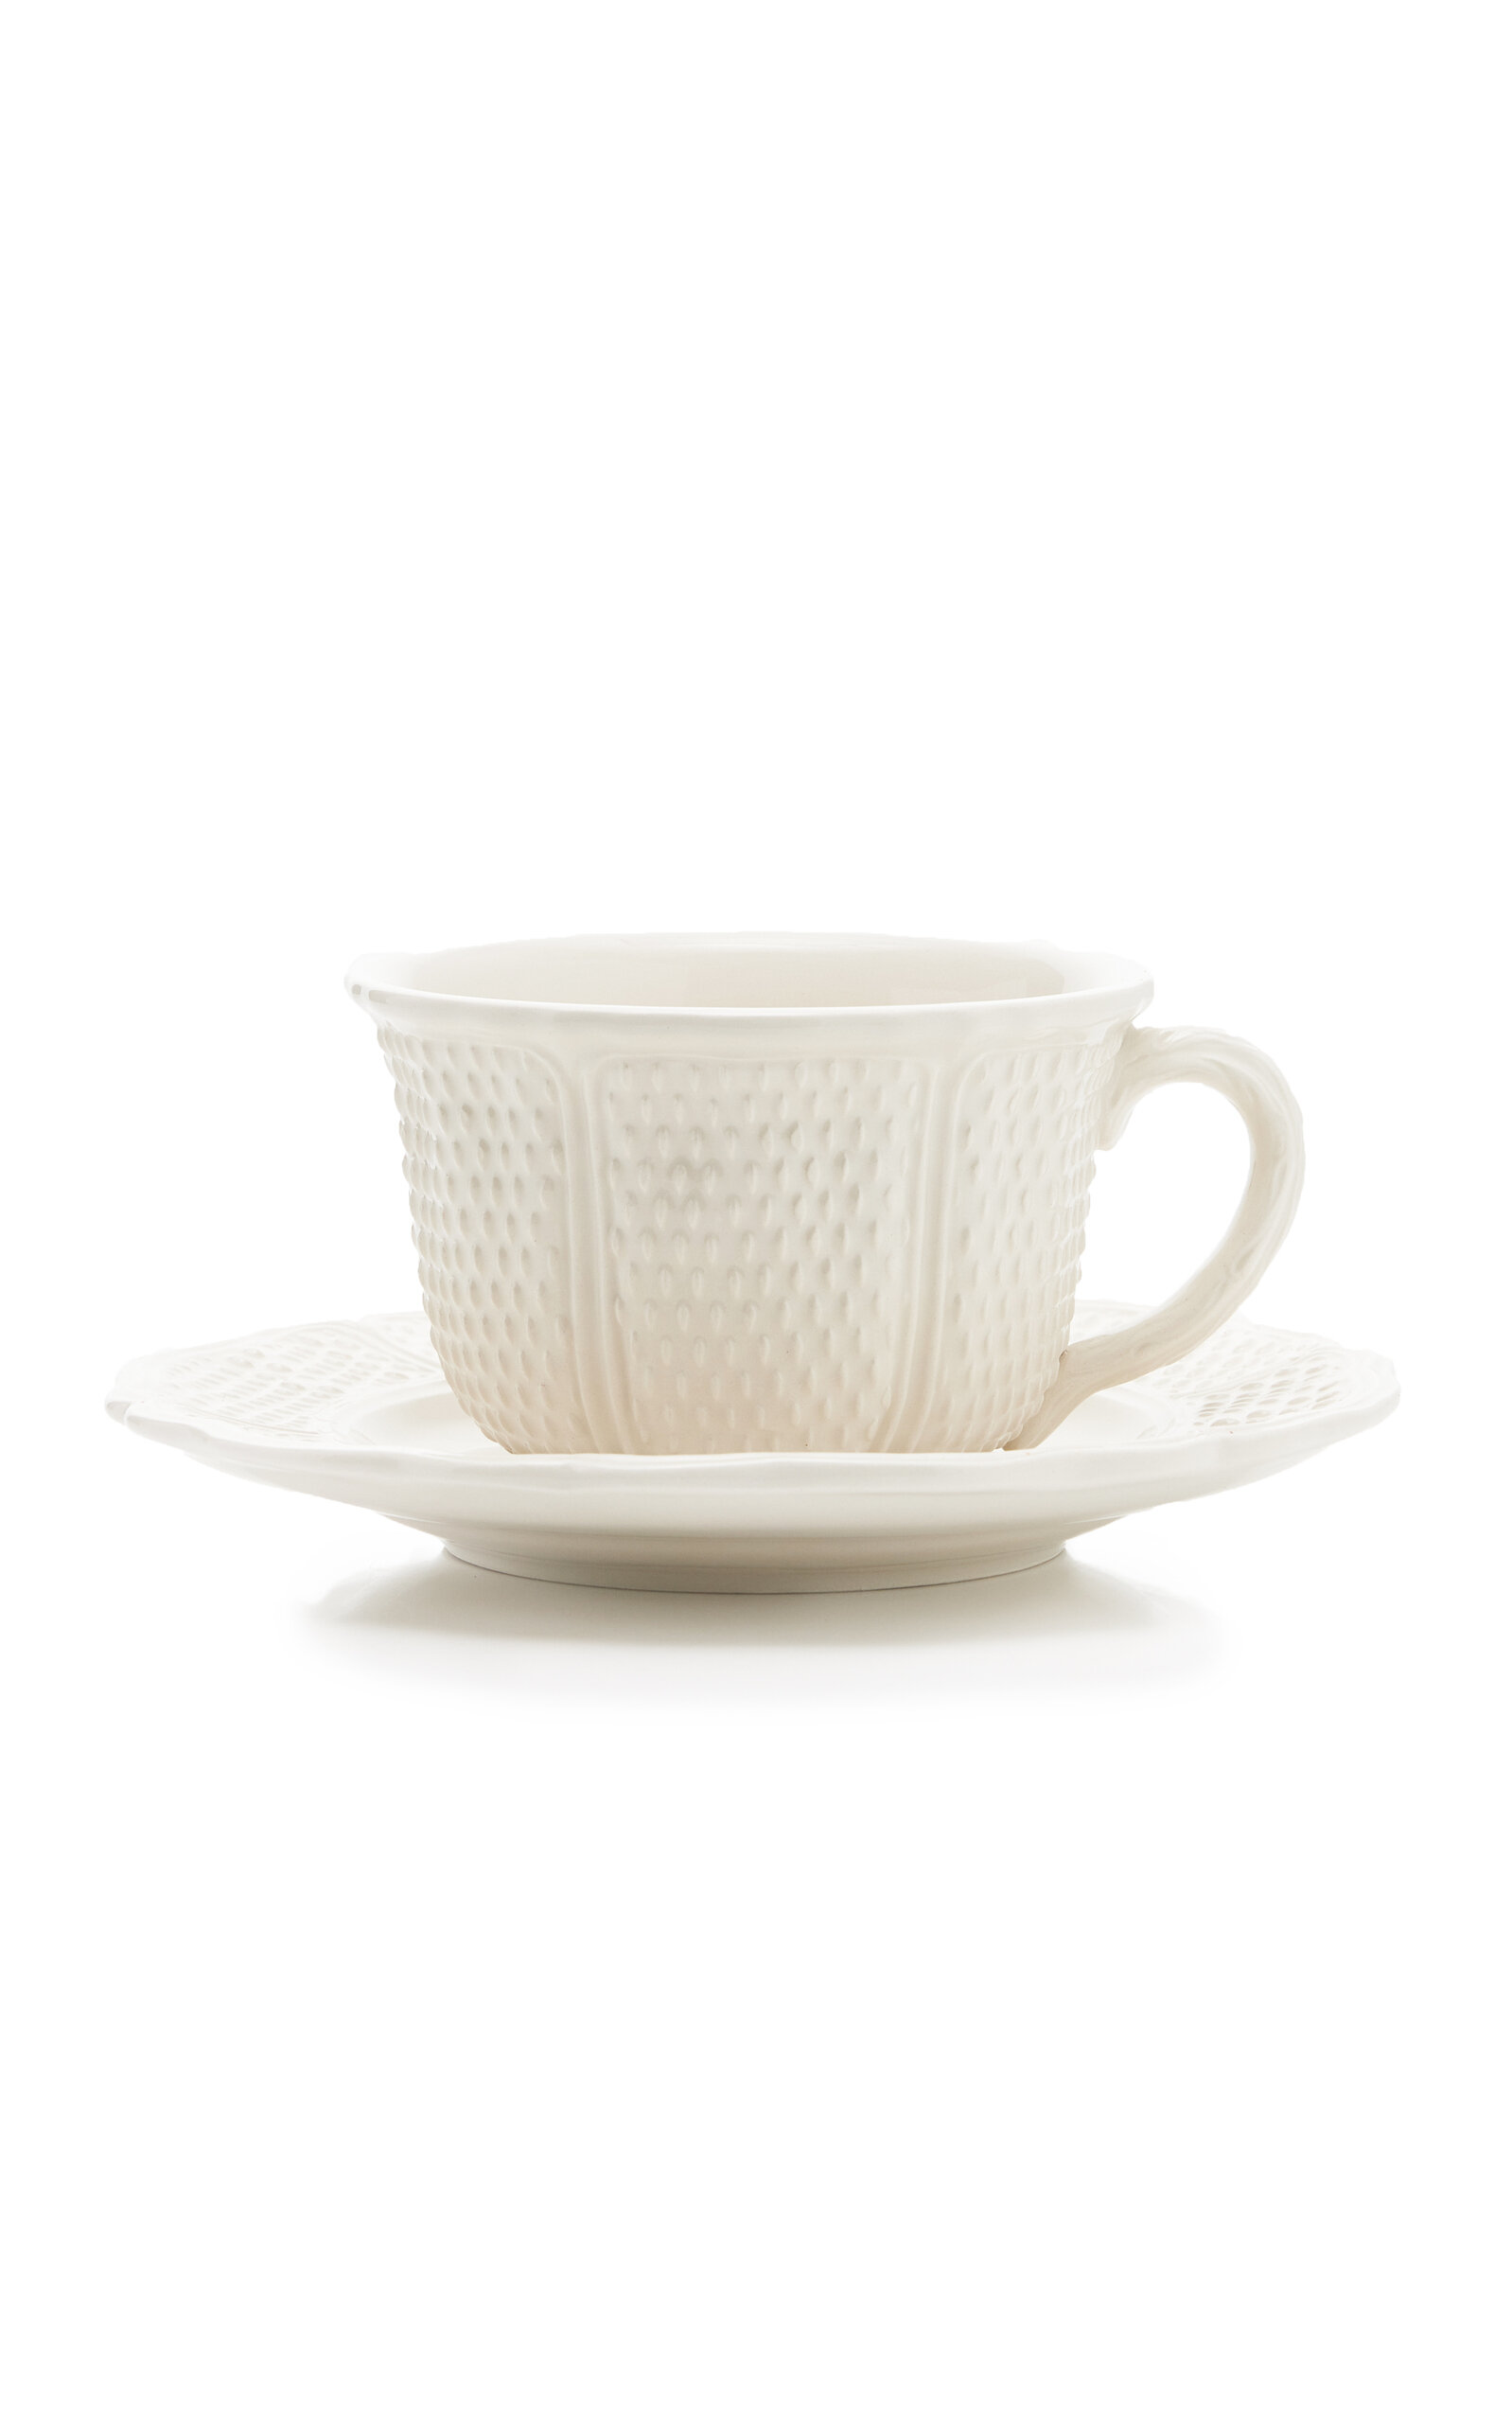 Moda Domus Doots Creamware Breakfast Cup And Saucer In White